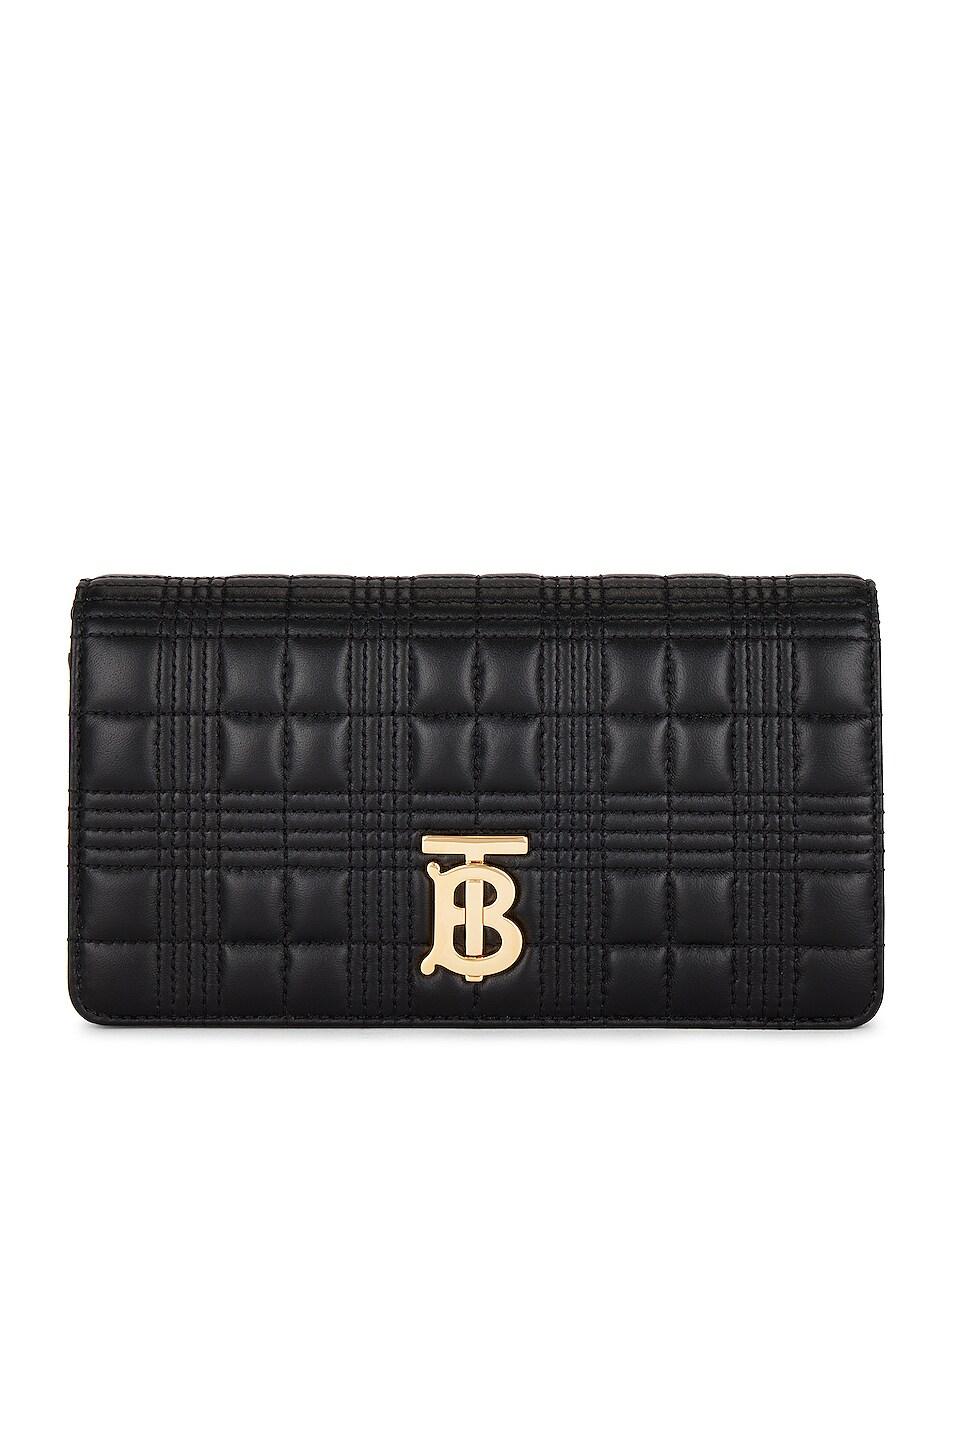 Burberry Leather Lola Chain Wallet Bag in Black | Lyst